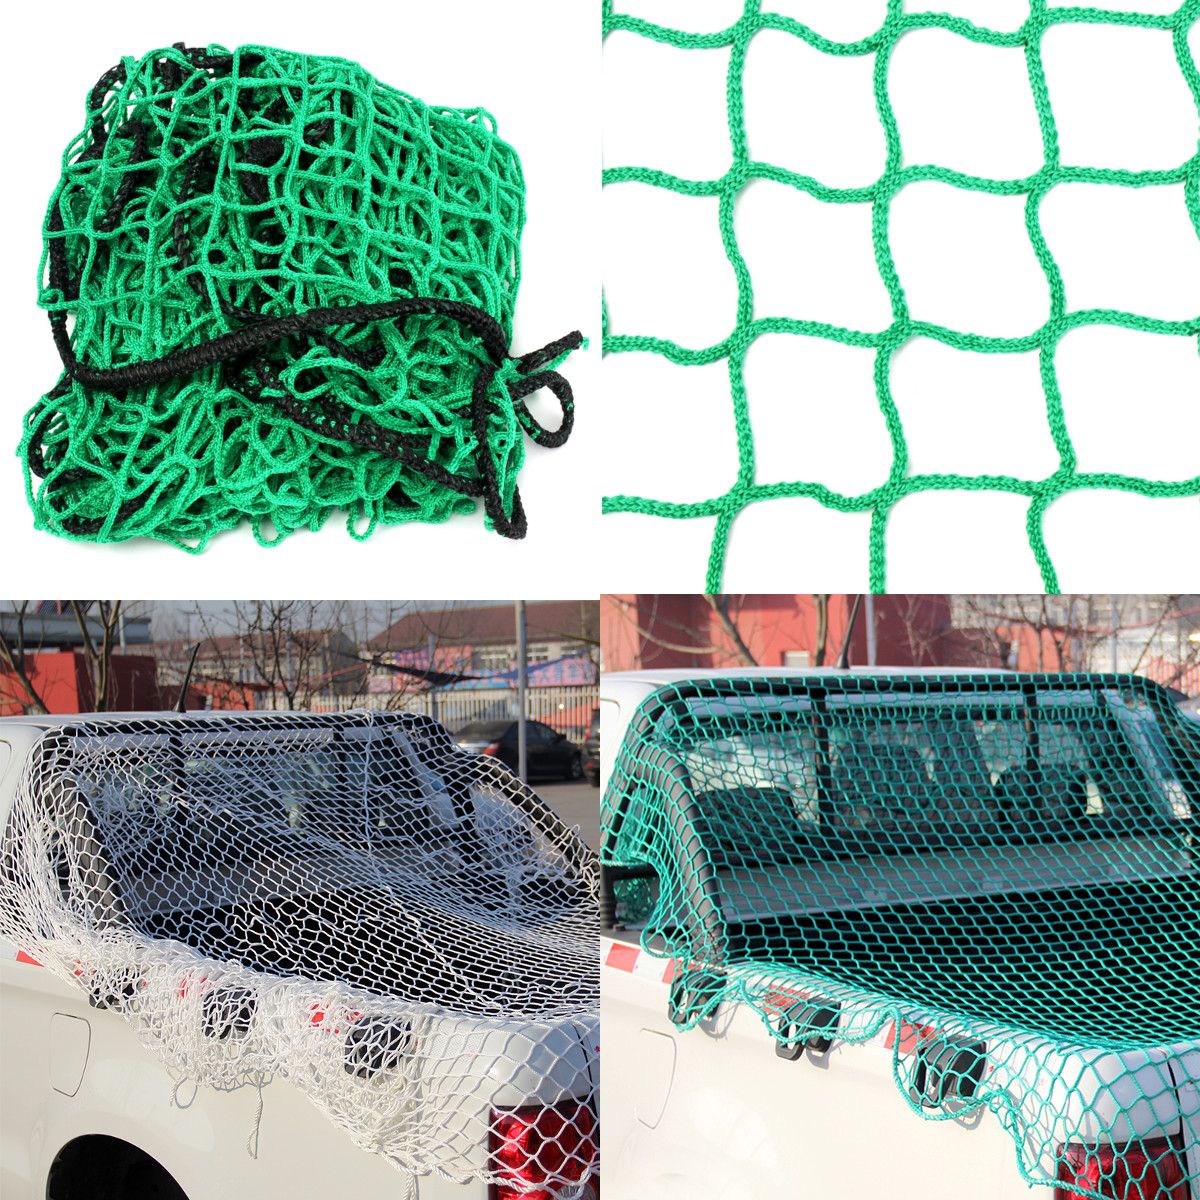 25m-x-17m-Heavy-Duty-Cargo-Net-Pickup-Truck-Trailer-Dumpster-Extend-Cover-Package-Shipping-Storage-N-1464488